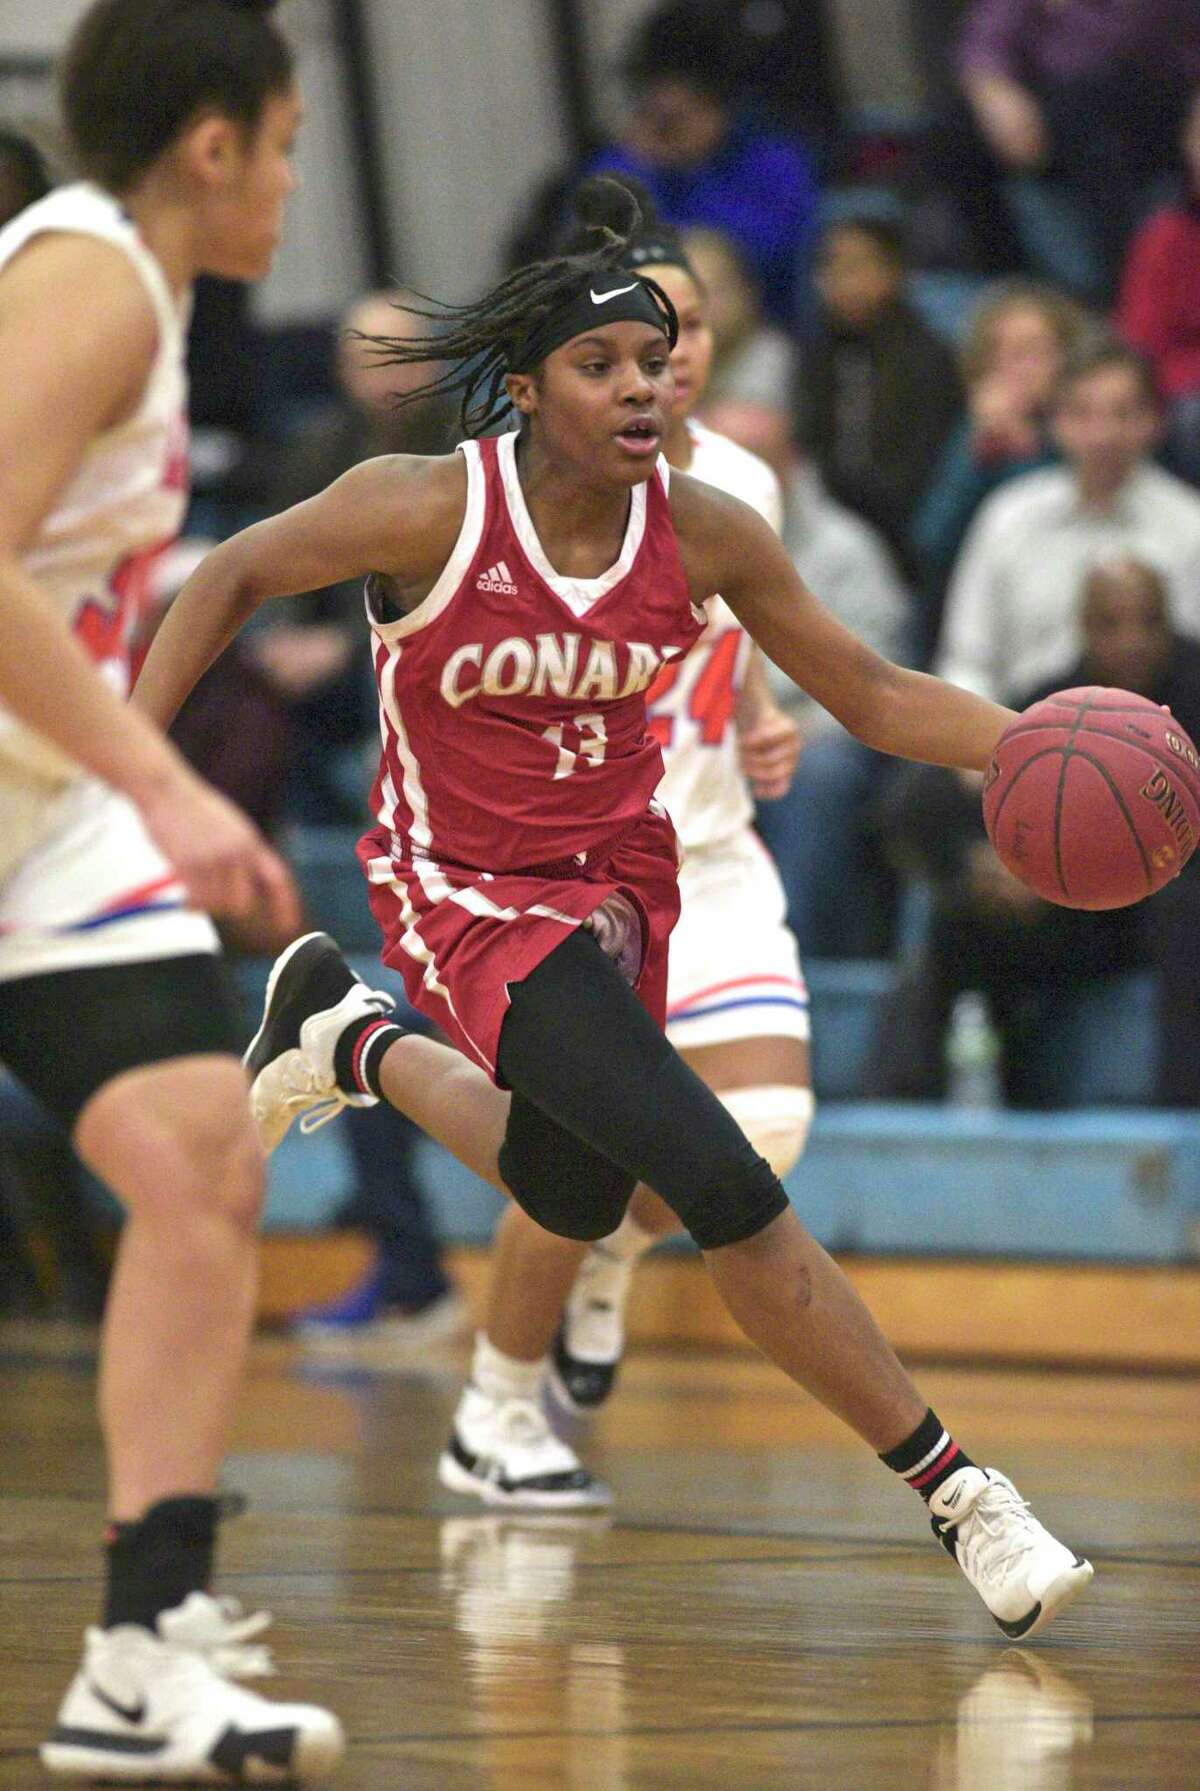 5 players to watch in the 2020 CIAC Girls Basketball tournaments